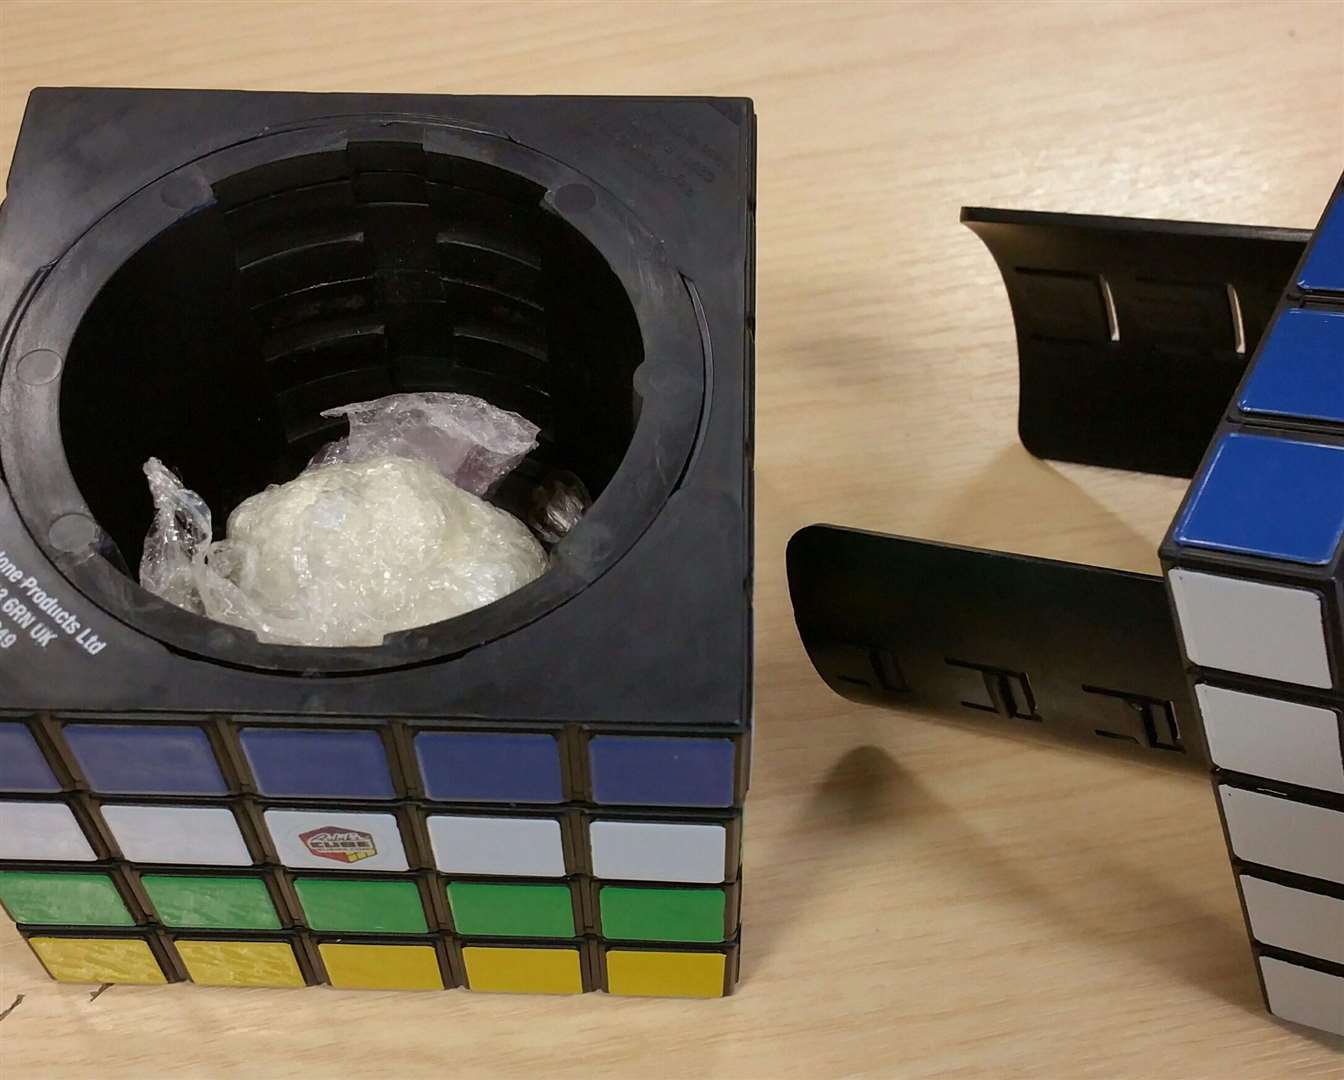 The Rubix cube that officers had to crack. (4028579)